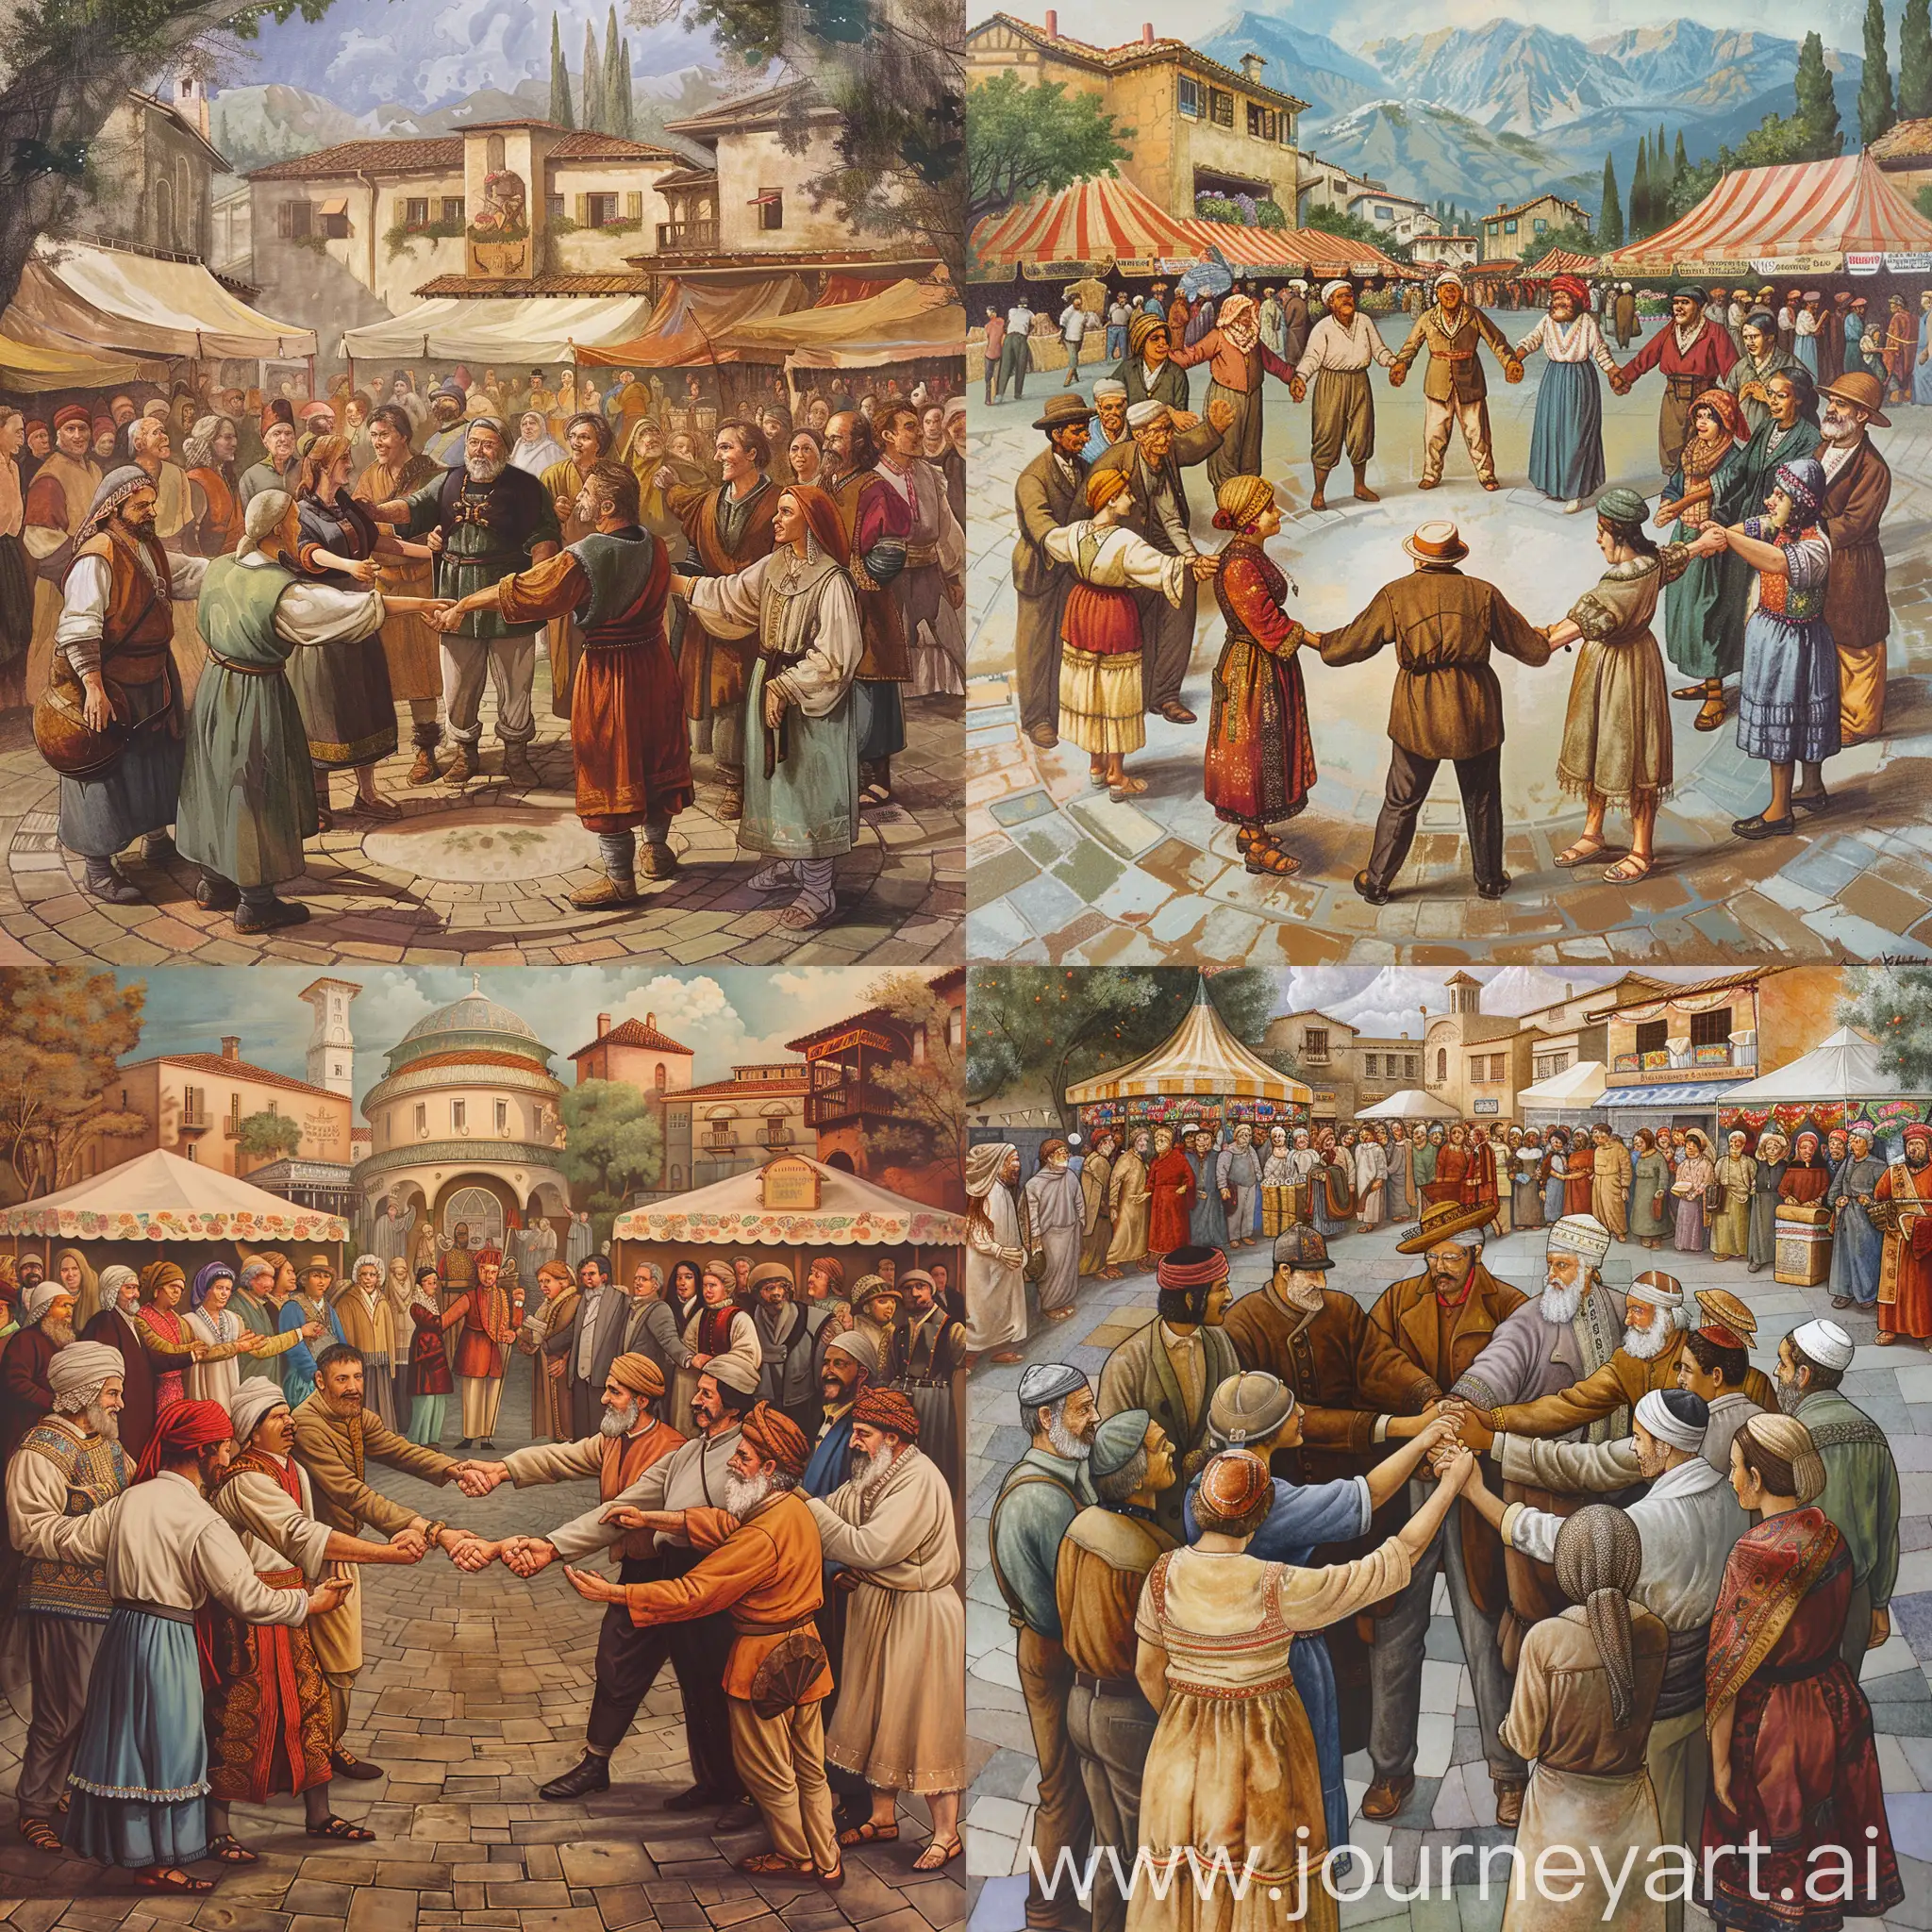 Picture an image in the style of a classic fresco mural, where a circle of people from various historical periods and backgrounds join hands in front of an old-world marketplace. The figures should be portrayed in a harmonious blend of warm earth tones, suggesting unity despite the passage of time. Their attire reflects their cultures, but their joined hands symbolize a timeless tradition of commerce and charity, making it an ideal representation for a charity market poster.